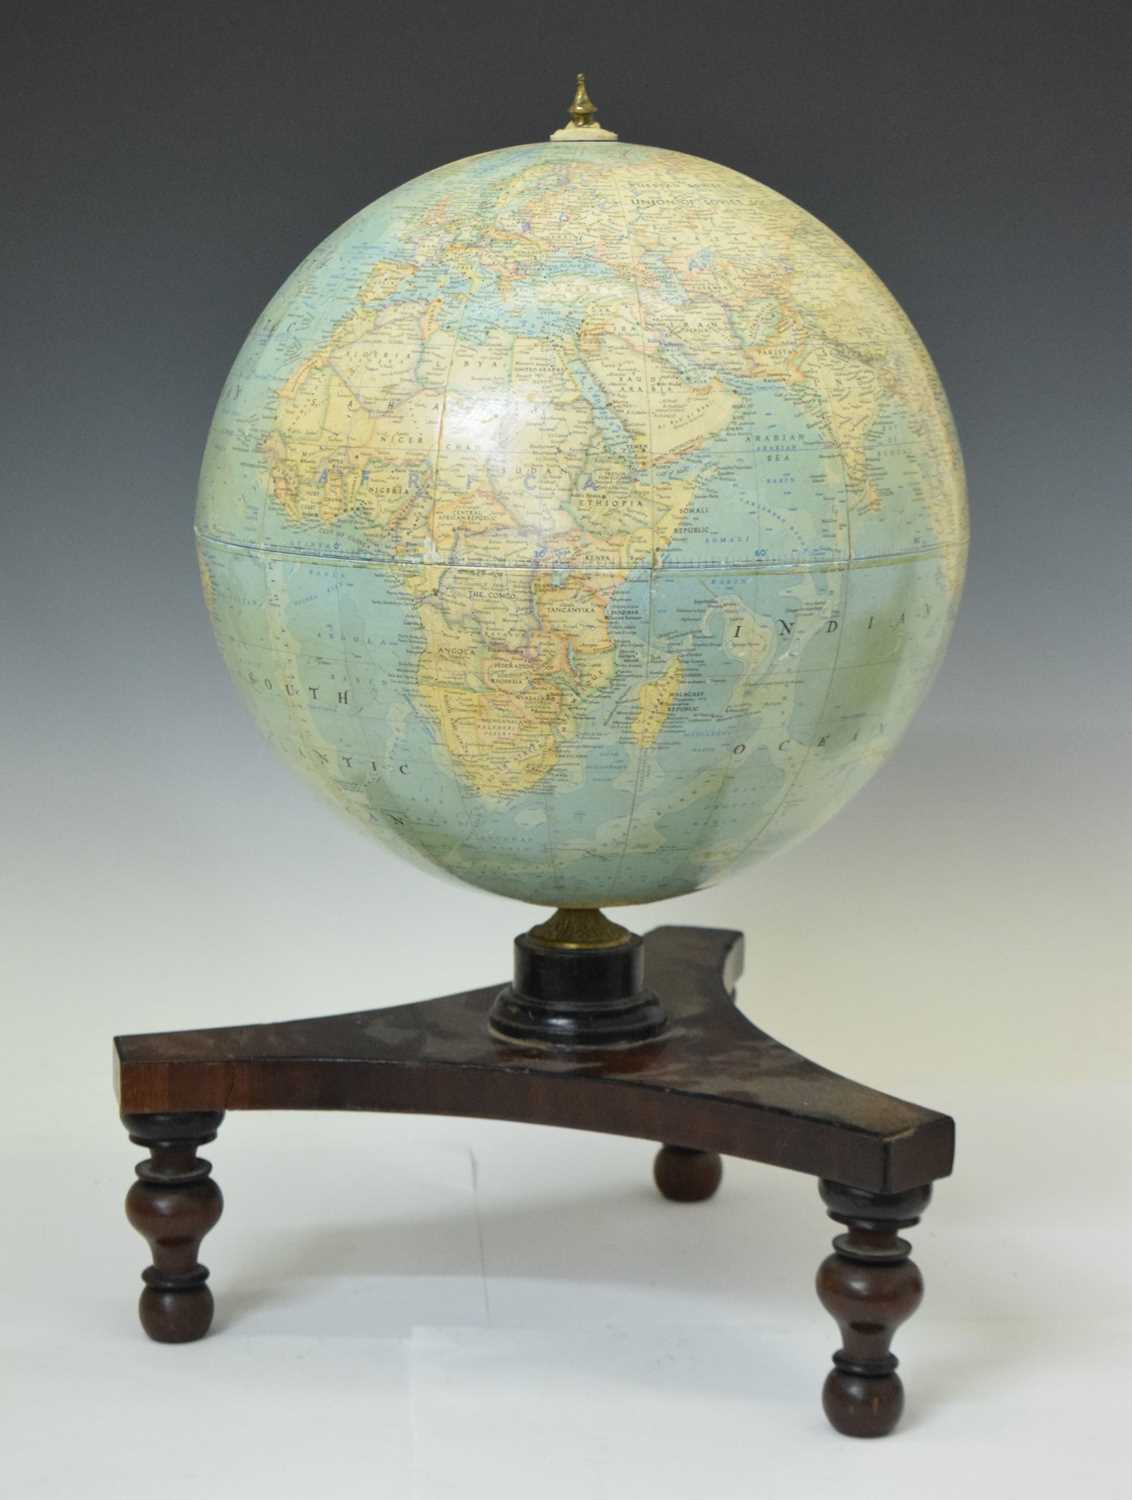 Lot 273 - Mid 20th century National Geographic globe